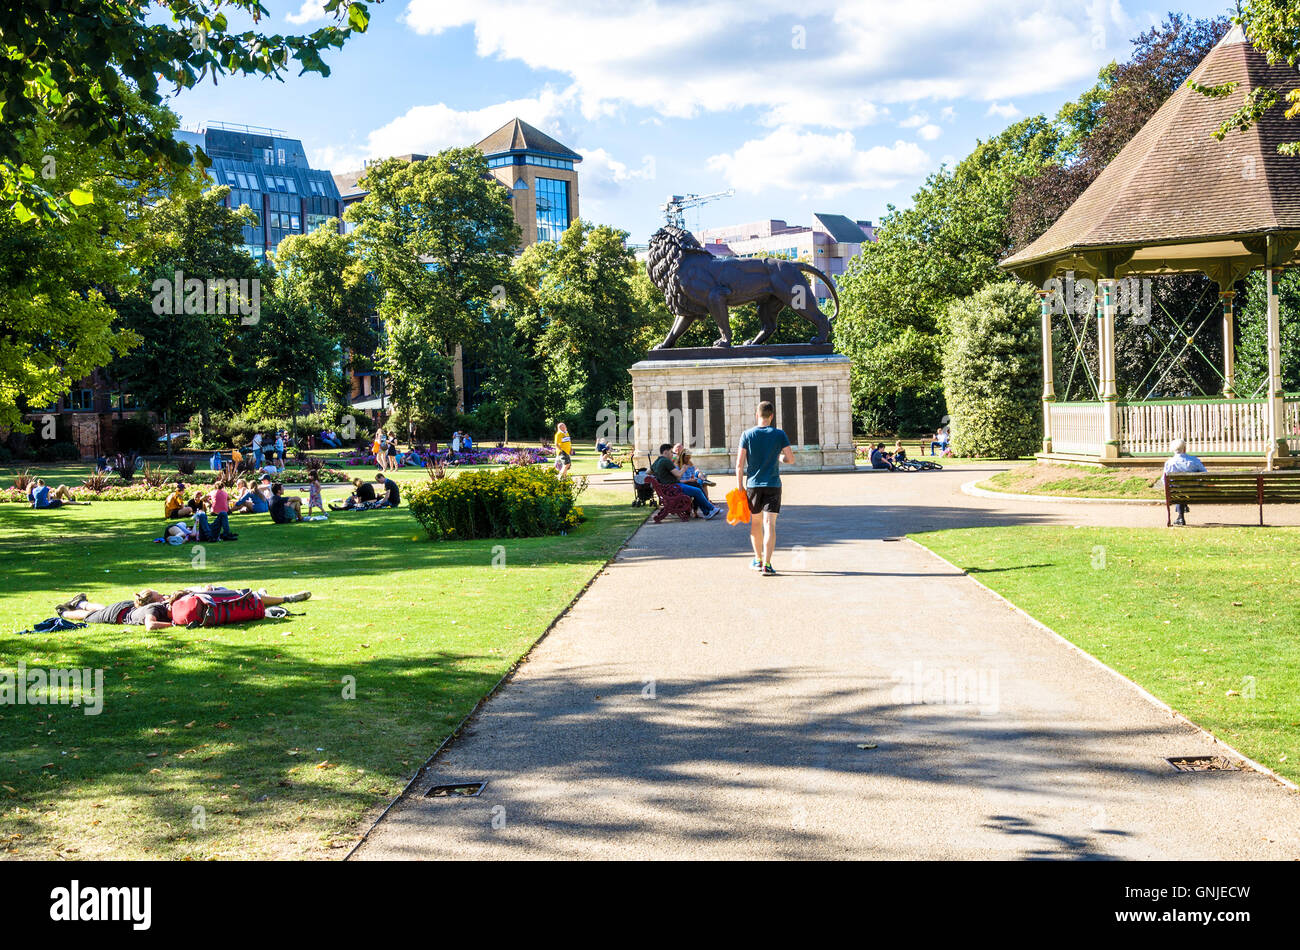 A view looking across Forbury Gardens in Reading, UK which features the Maiwand Lion at it's centre. Stock Photo